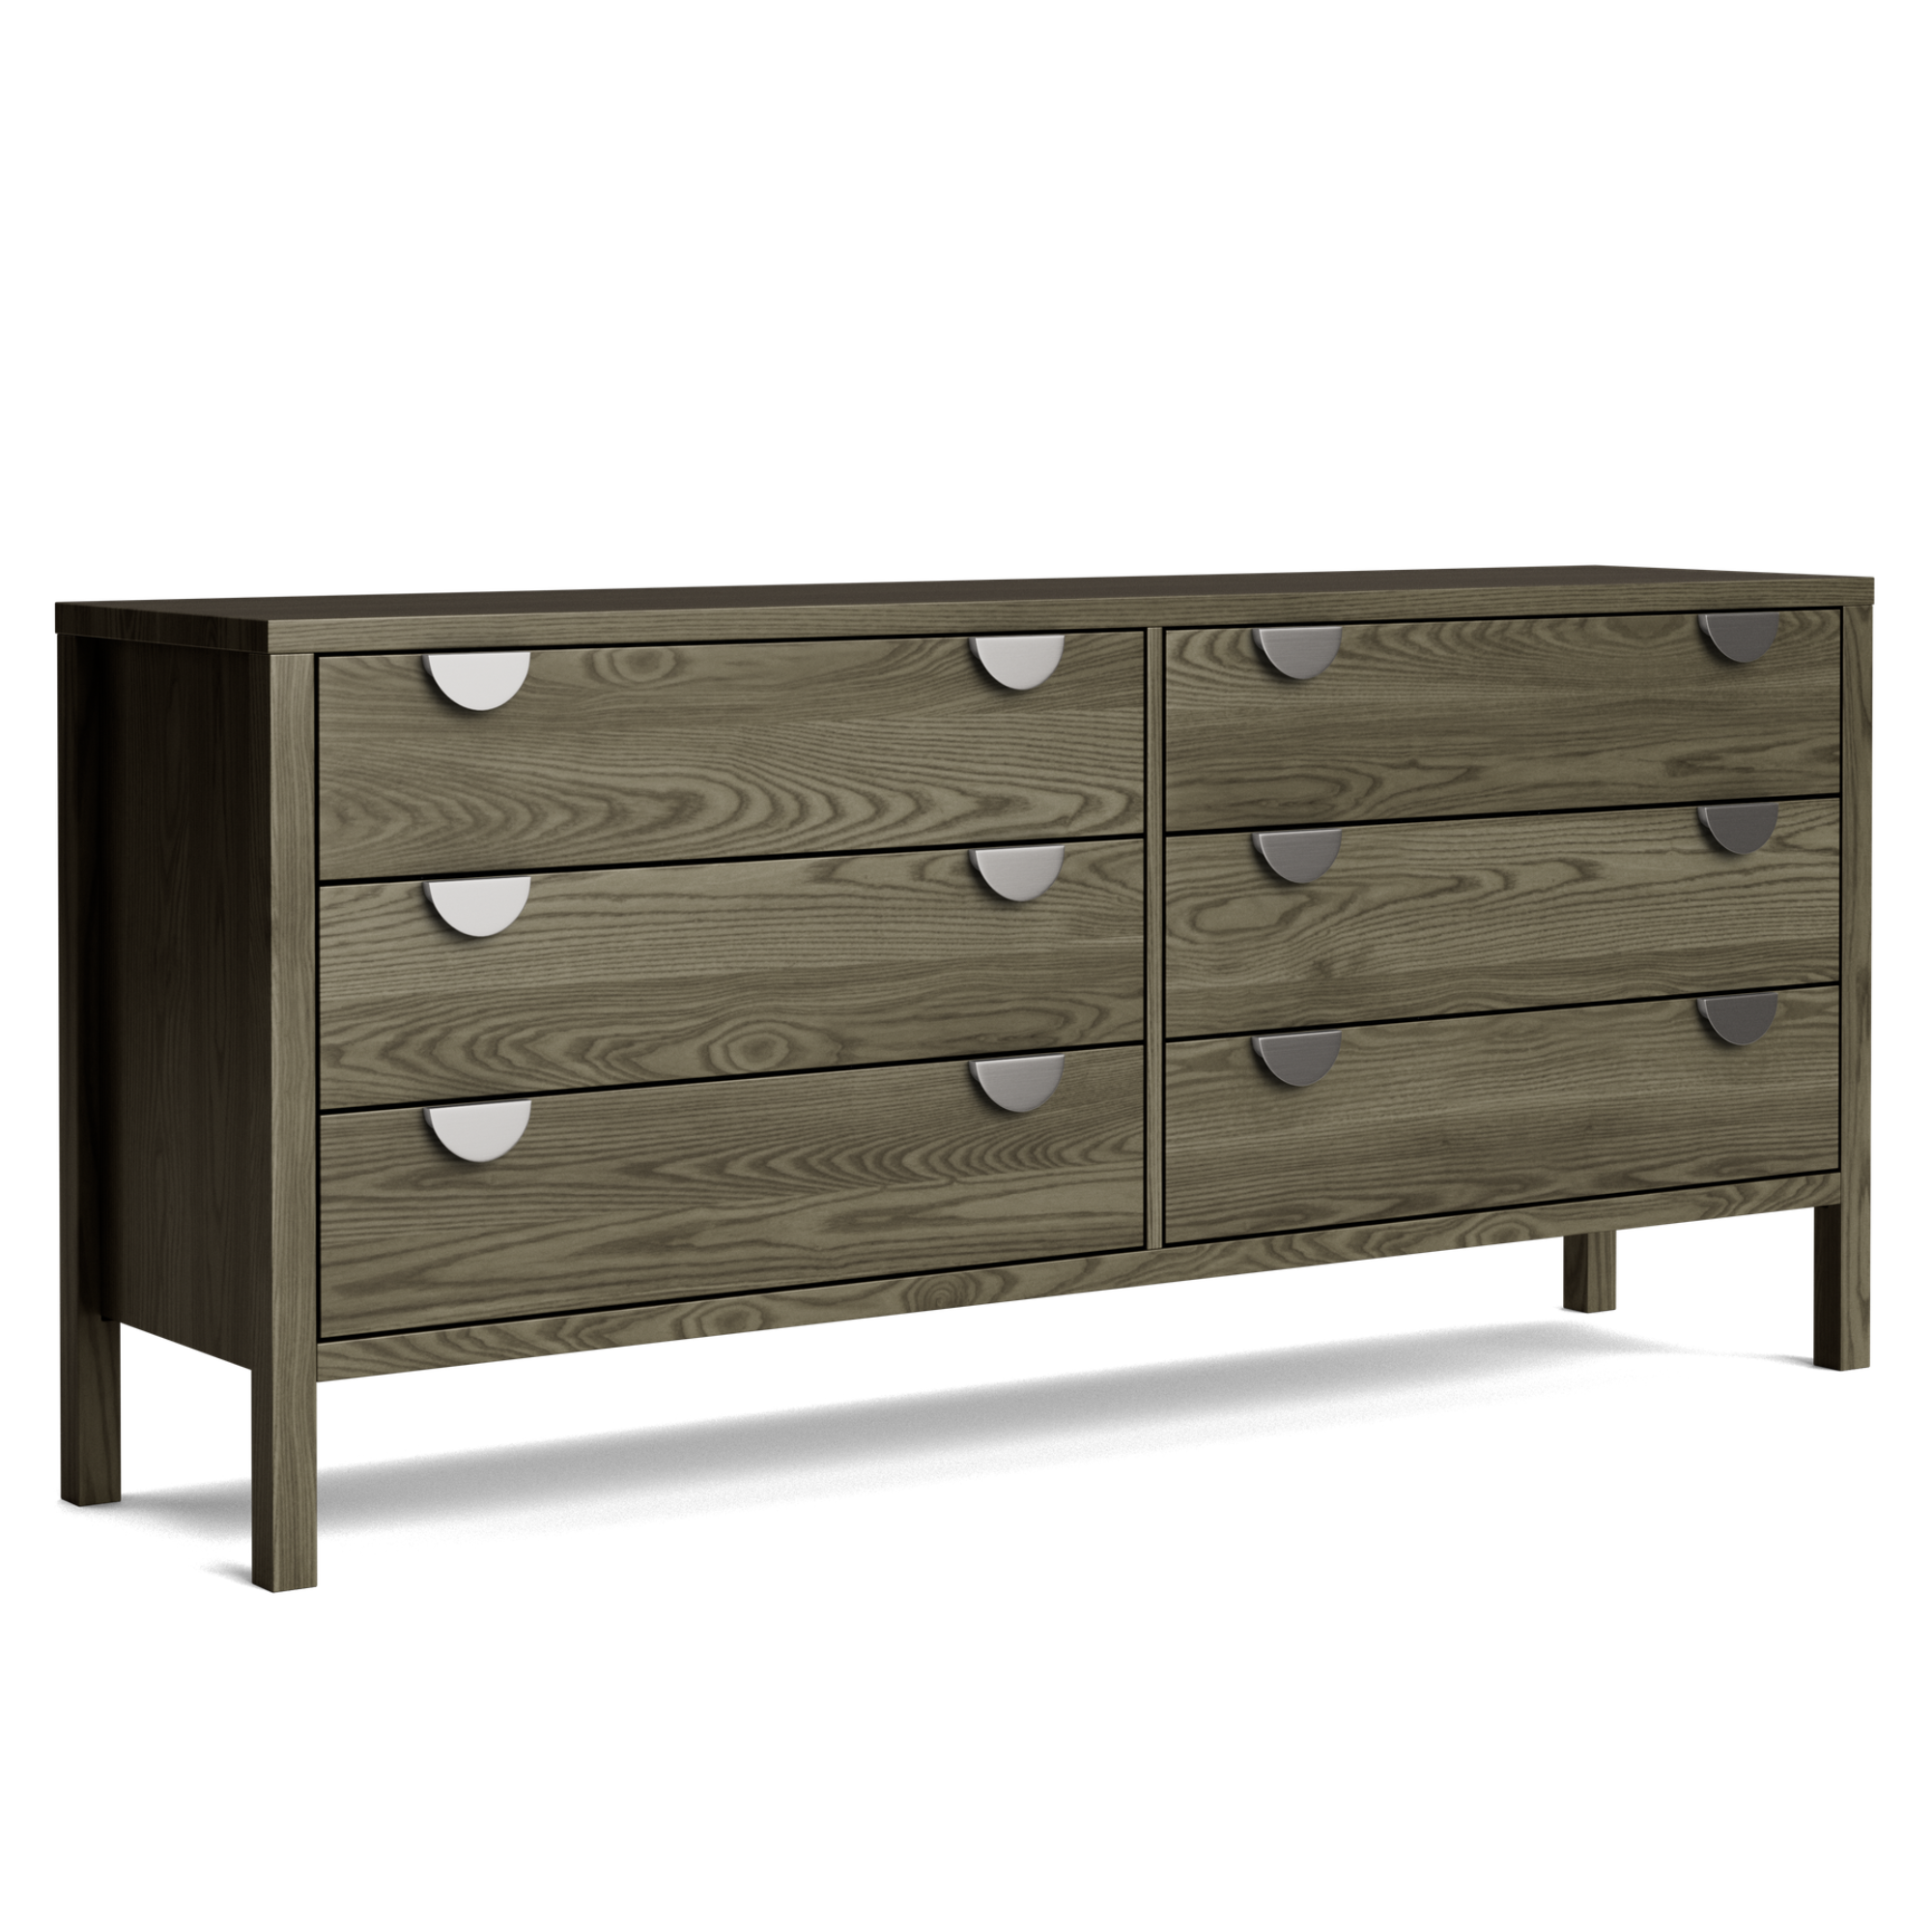 ANDES 6 DRAWER WIDE LOWBOY | NZ PINE OR AMERICAN ASH | NZ MADE